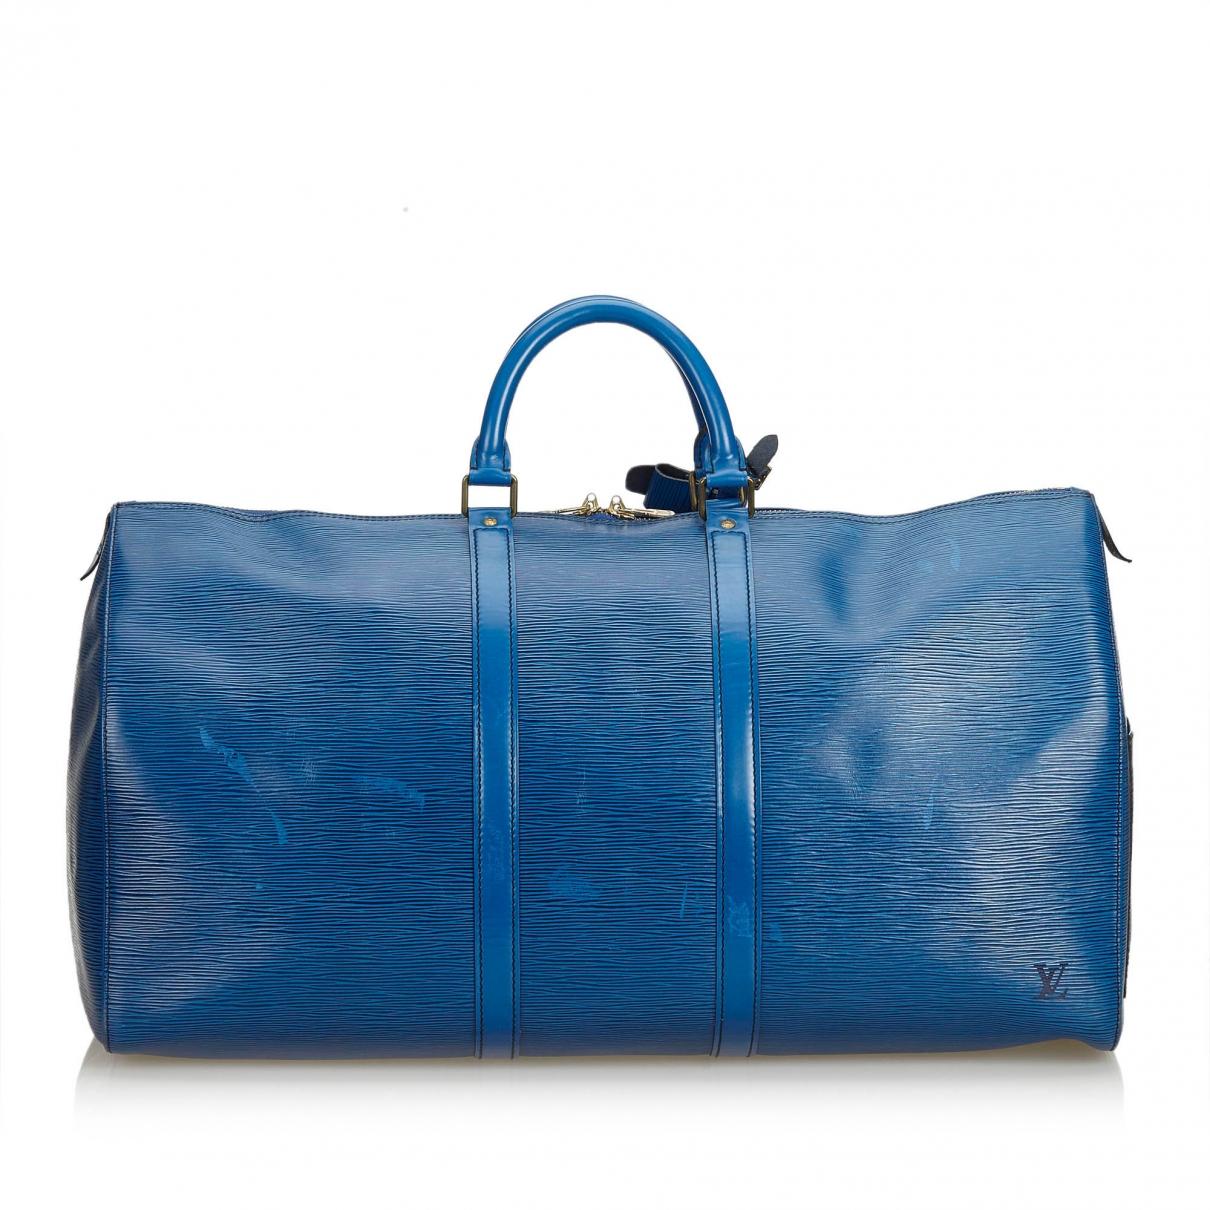 Lyst - Louis Vuitton Vintage Keepall Blue Leather Travel Bag in Blue - Save 7%